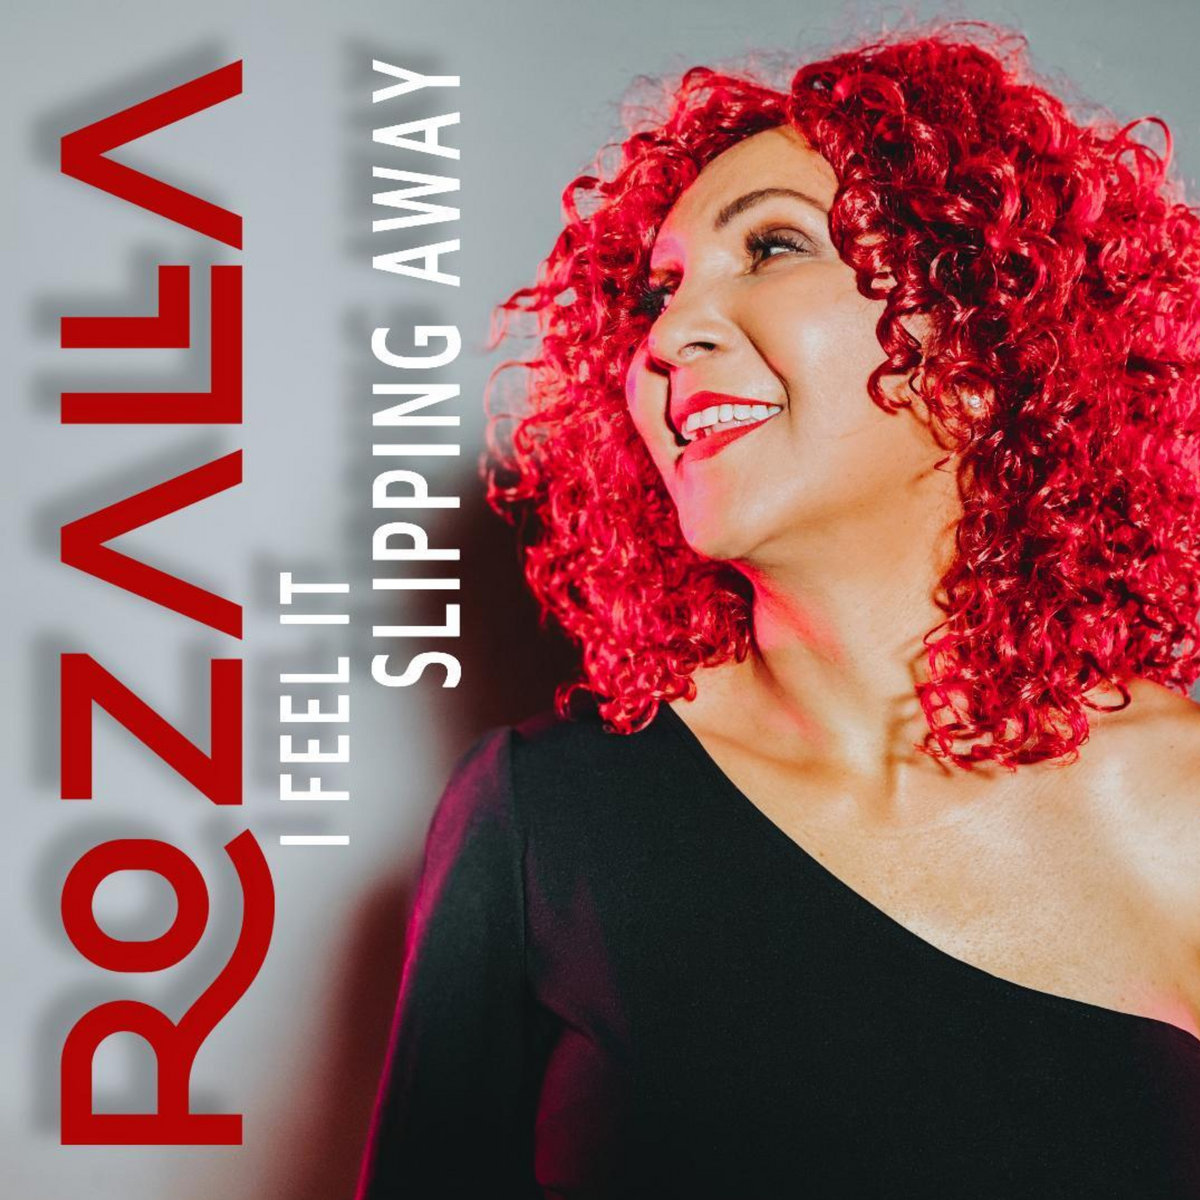 Coming up between 10pm & midnight tonight @passionradio once more @rozallab chats to @SoulfulScotsman on @groovelinesoul Check it out if you haven't already via several stations it's been aired on so far. 📻❤️🎵#Rozalla #Passion #radio #grooveline #interview #checkitout #tonight